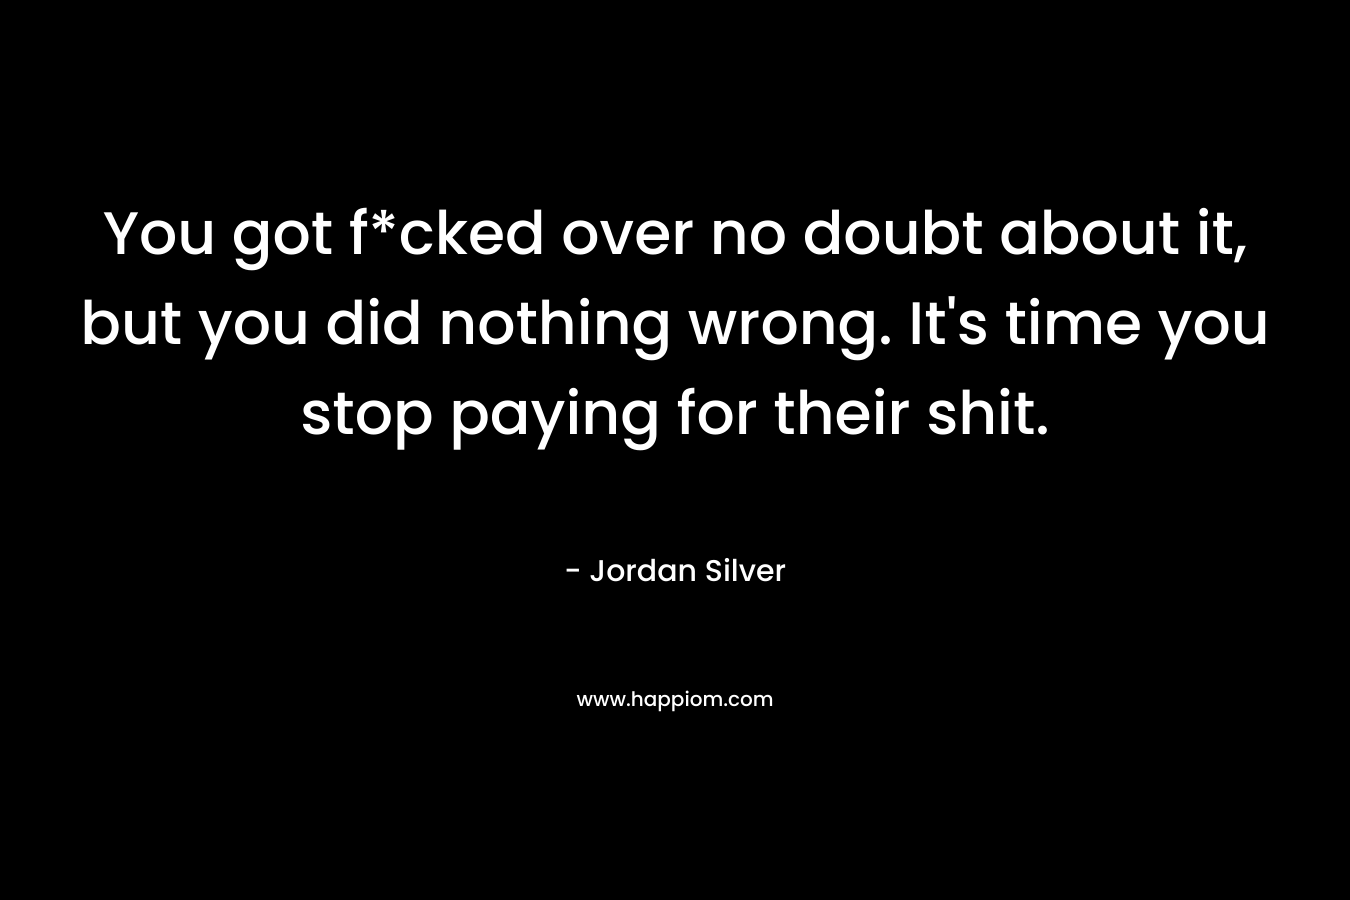 You got f*cked over no doubt about it, but you did nothing wrong. It’s time you stop paying for their shit. – Jordan Silver